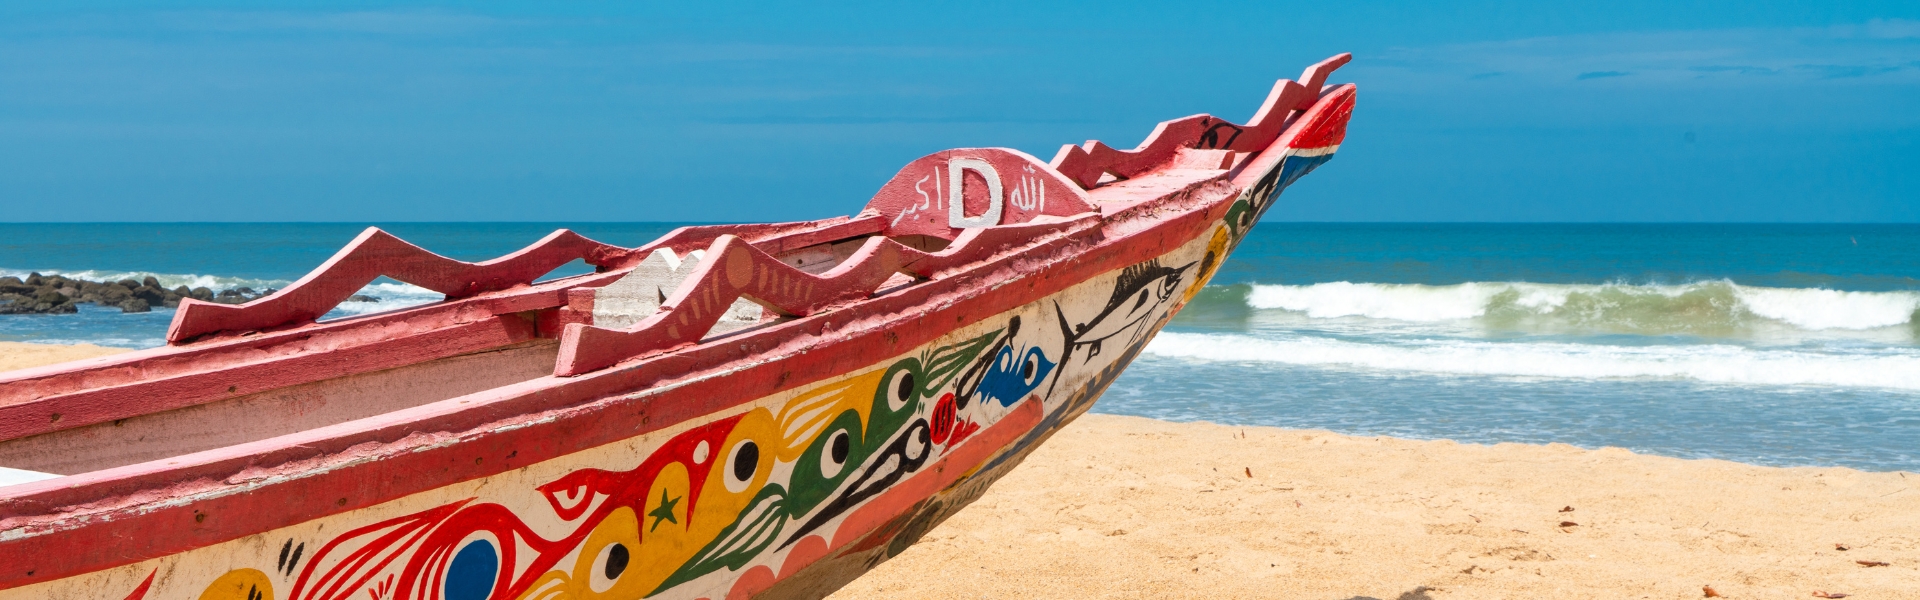 Photo of a boat on the beach sand on the shore in Senegal.